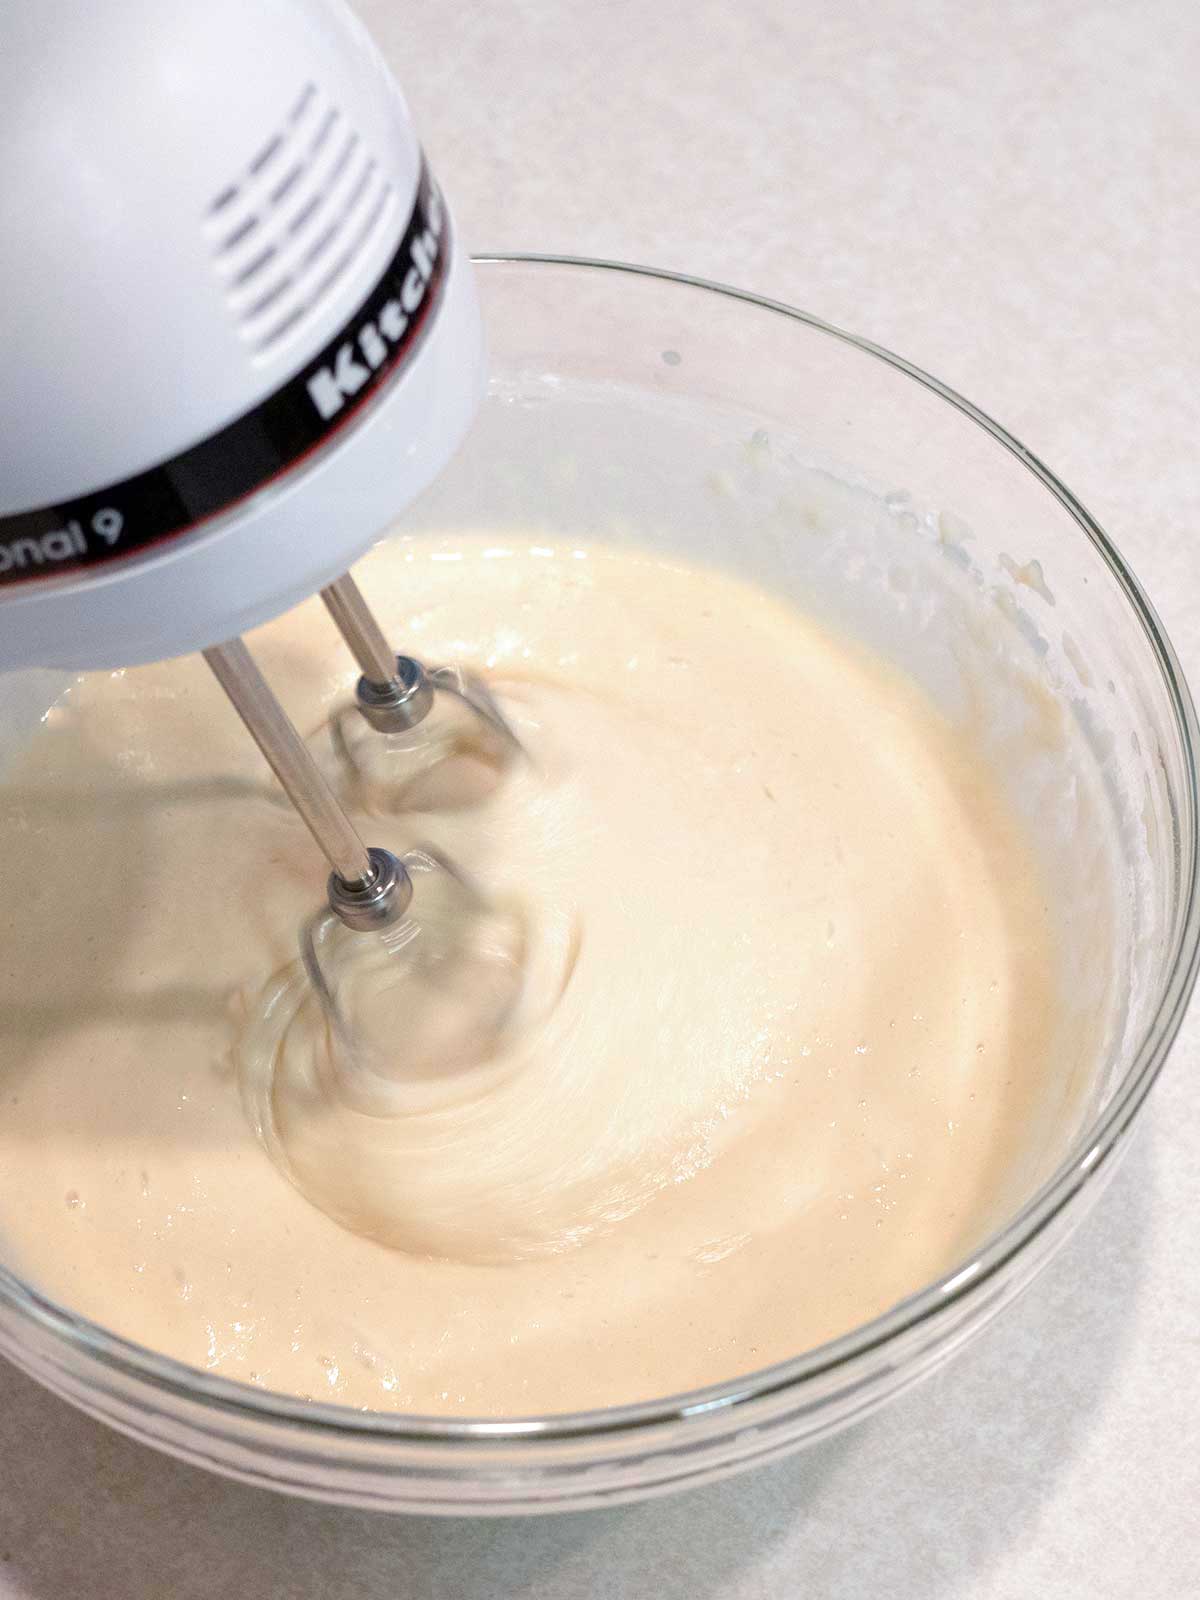 Beating the batter with electric mixer.